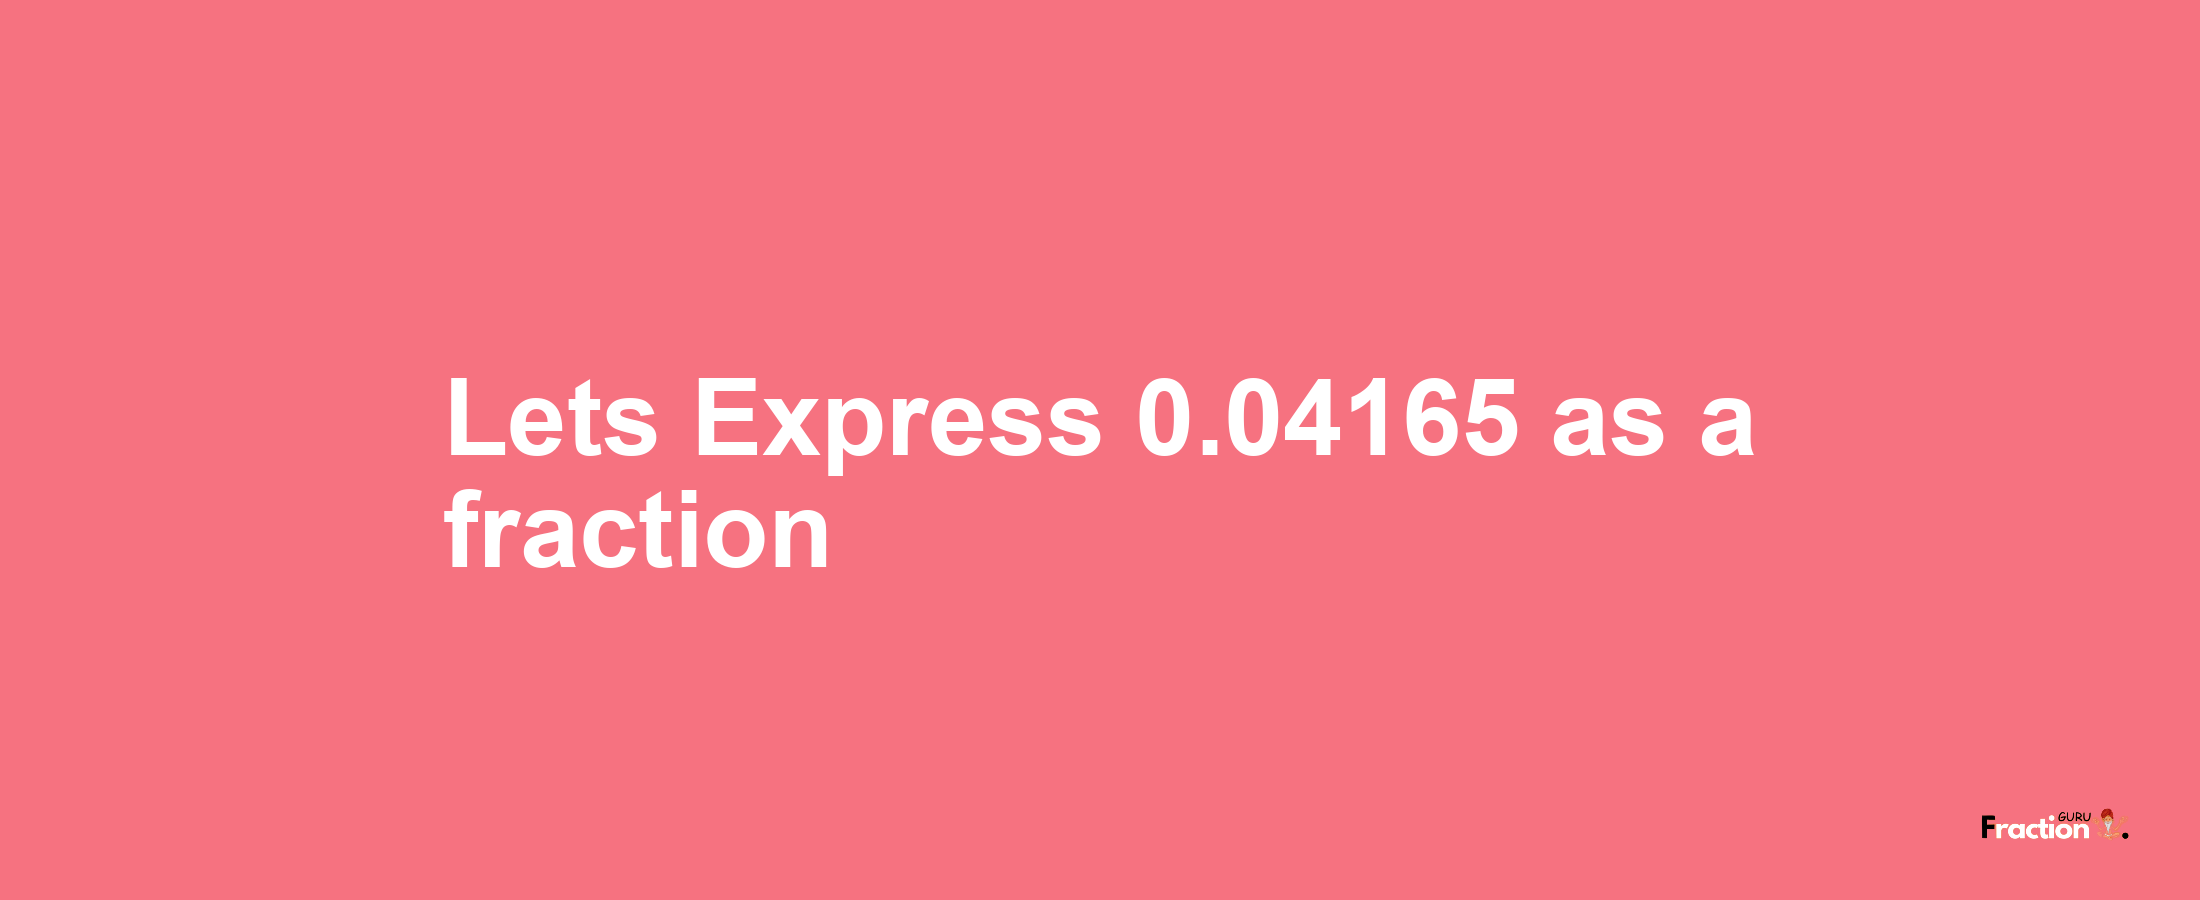 Lets Express 0.04165 as afraction